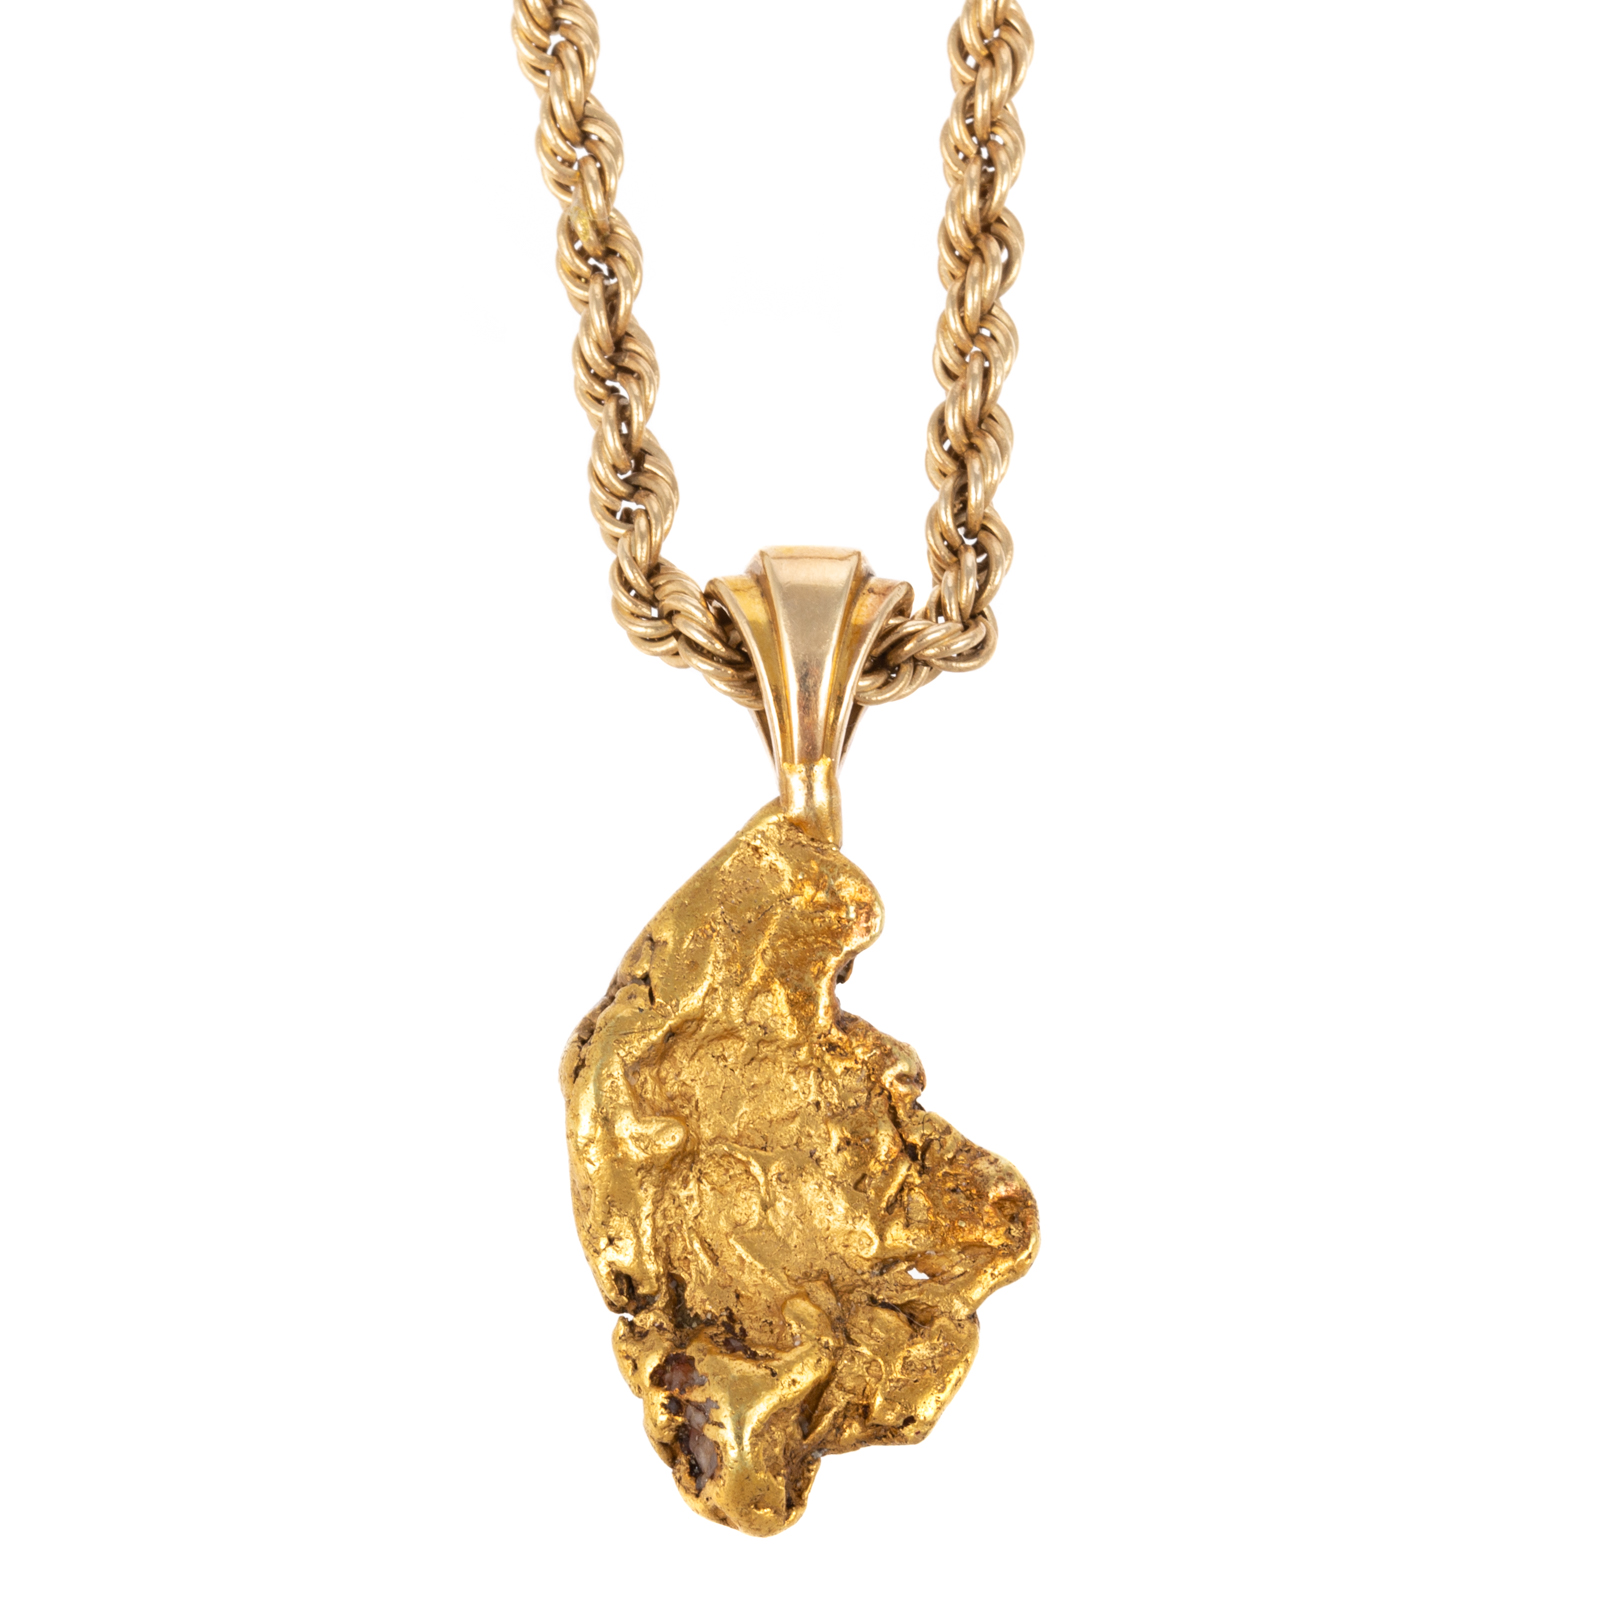 A GOLD NUGGET PENDANT ROPE CHAIN 36956a